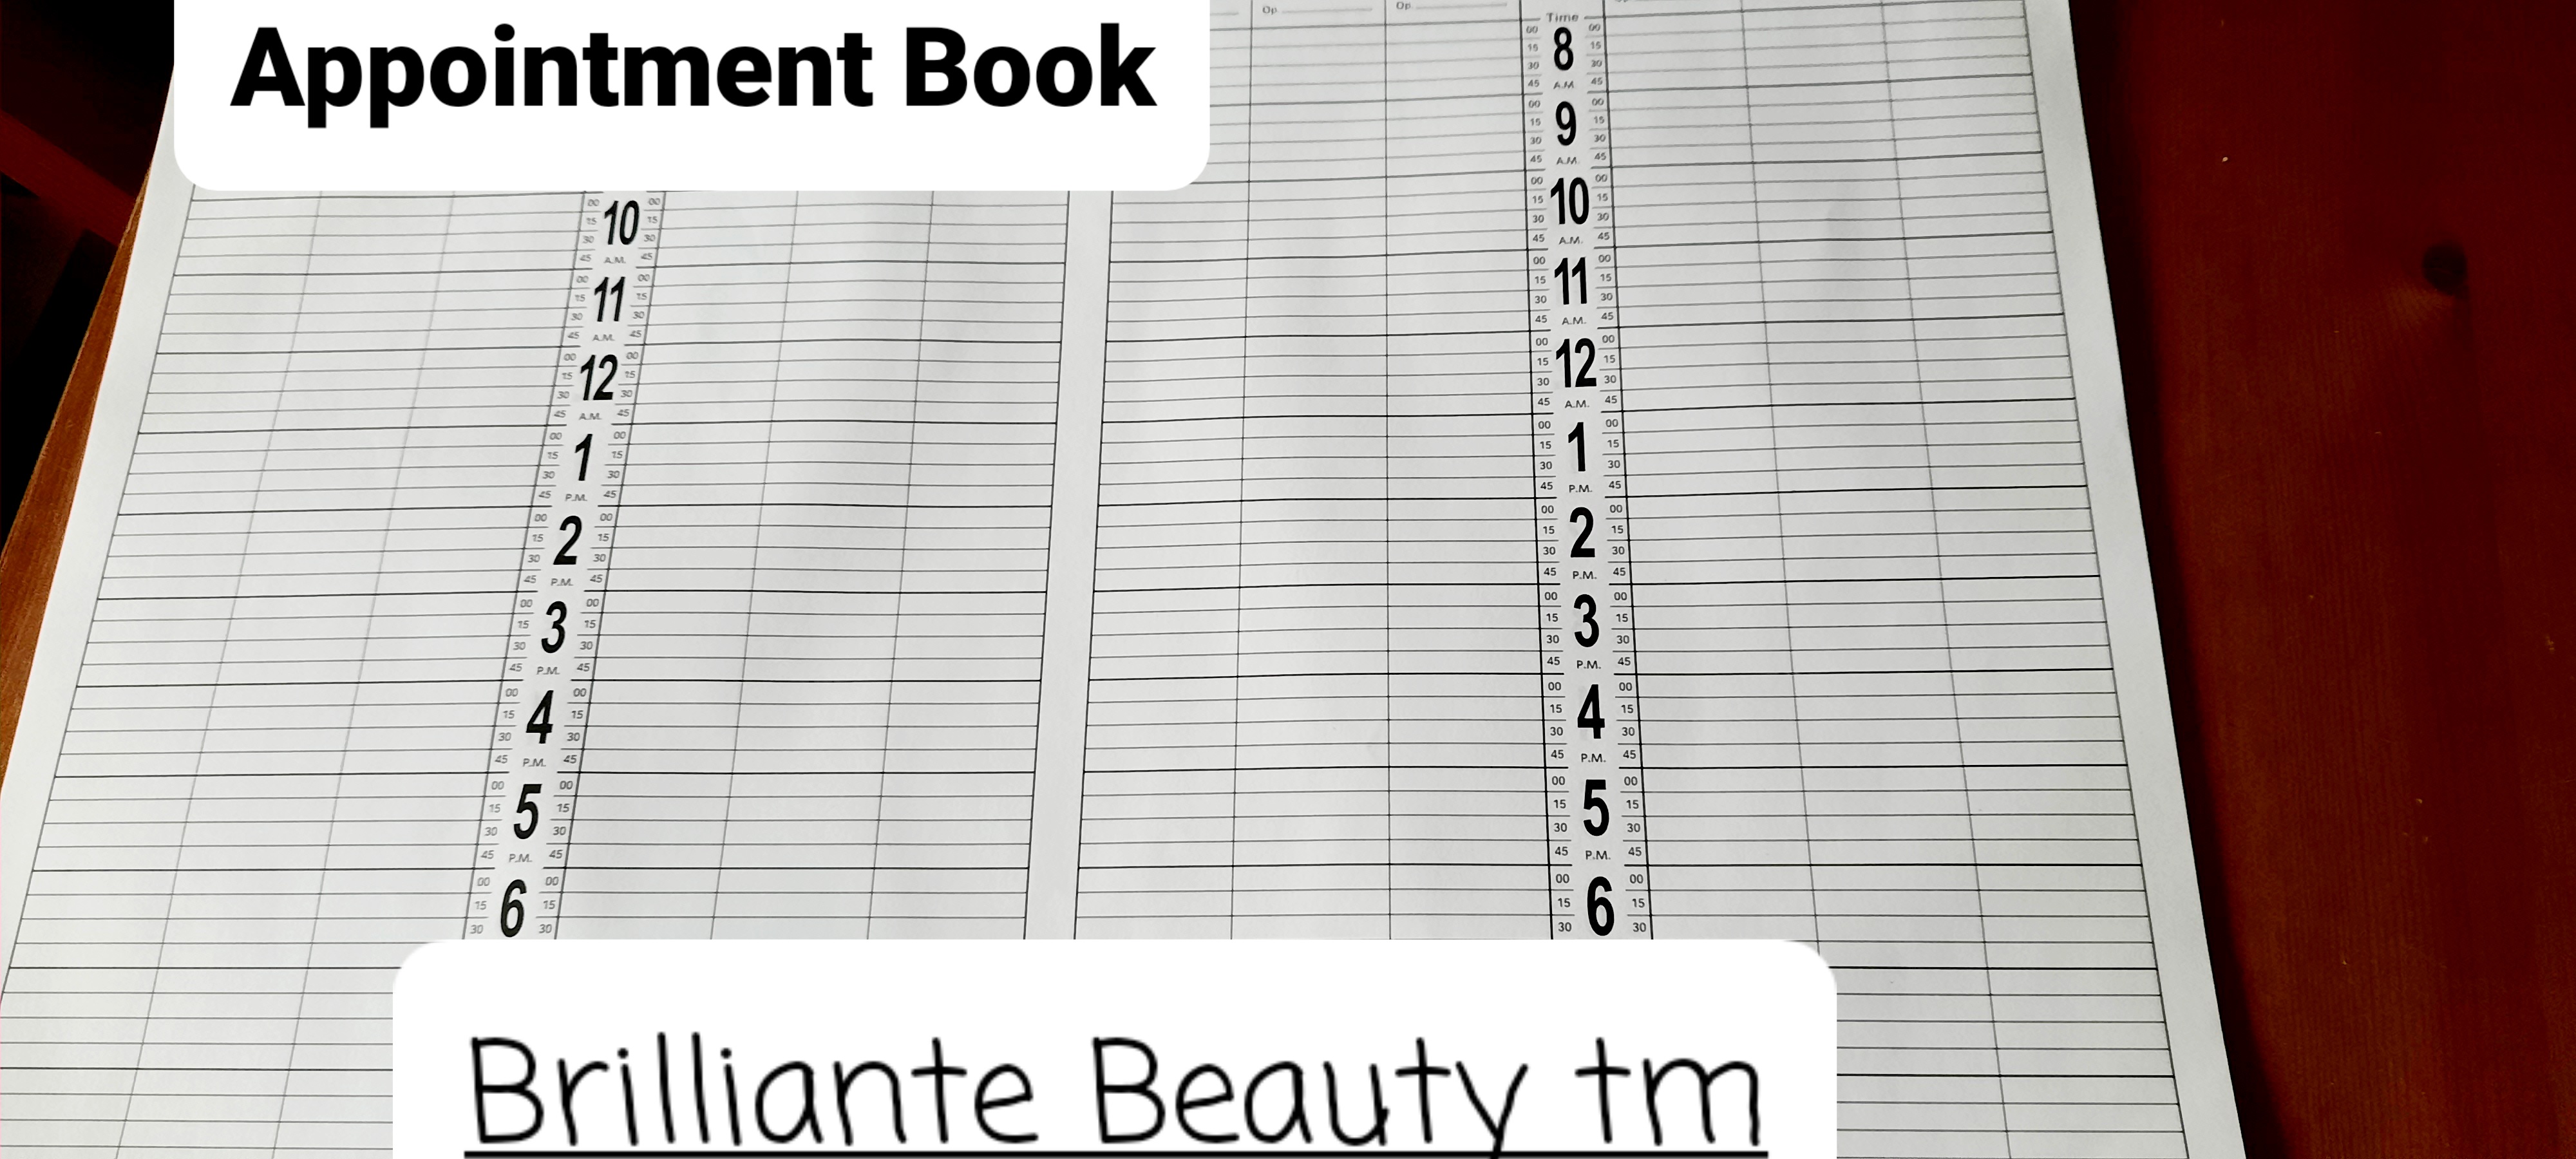 #ABK-12 BEAUTY SALON APPOINTMENT BOOK FROM POLLY PRODUCTS COMPANY 